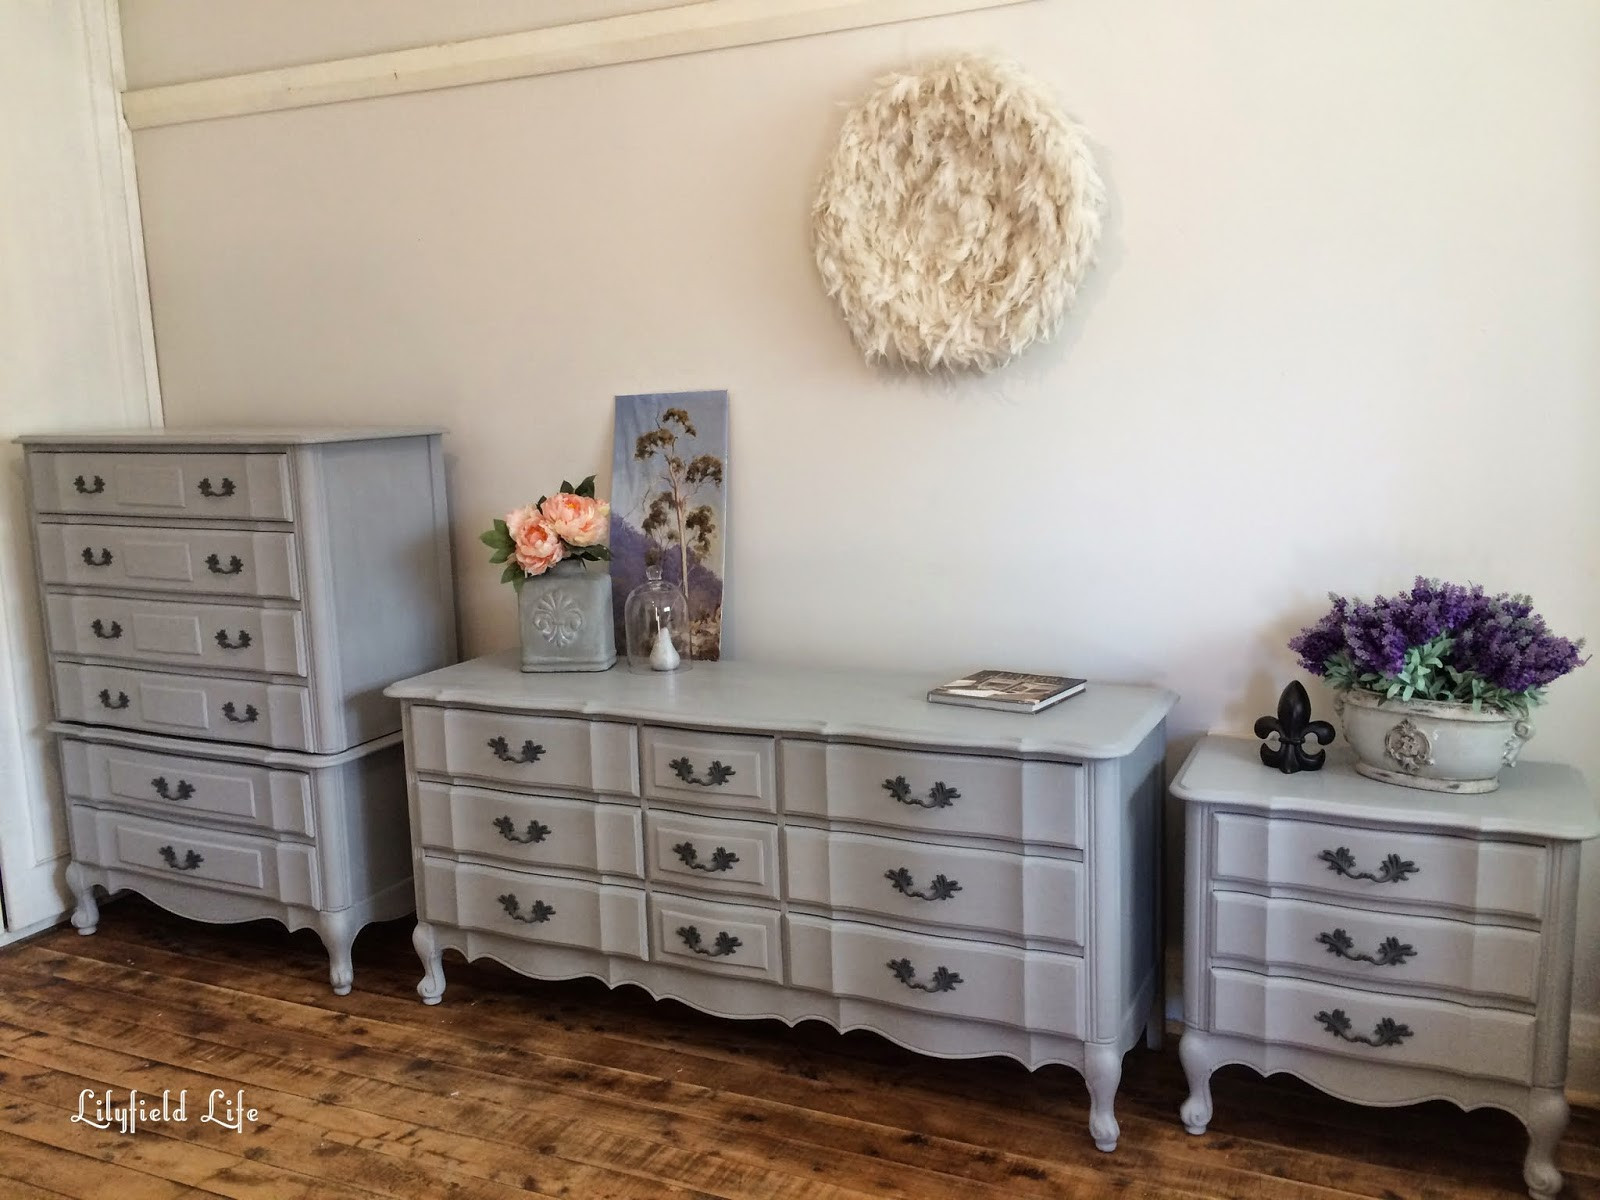 Painted Bedroom Furniture
 Lilyfield Life ASCP Paris Grey French Style Bedroom Furniture